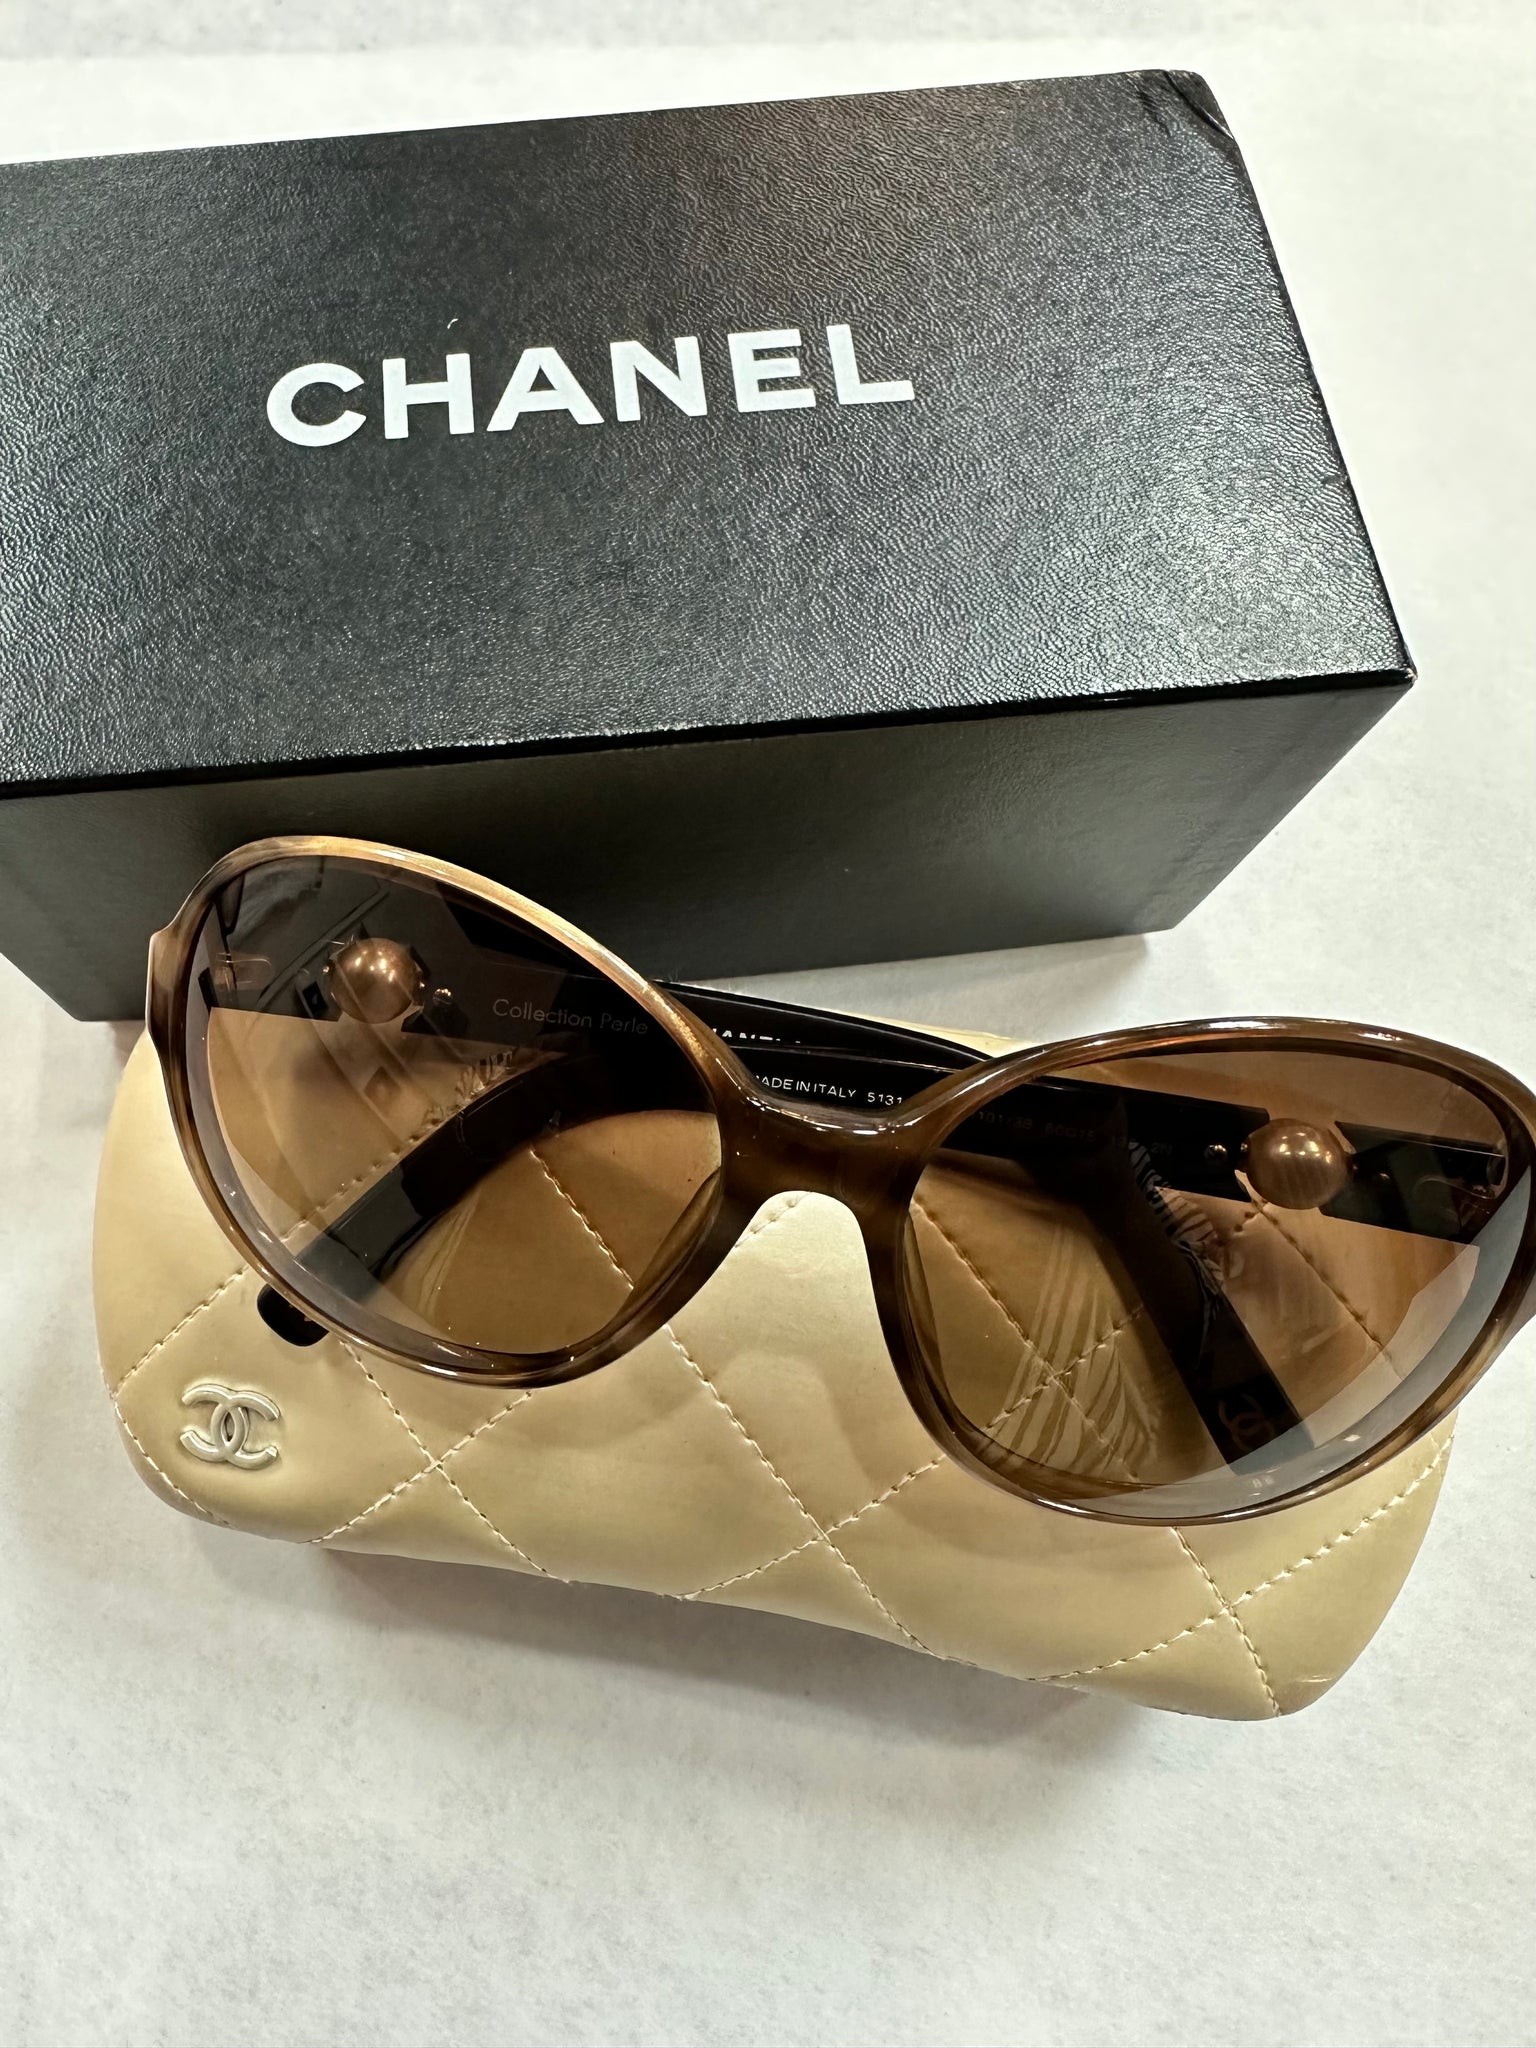 Women's Designer Eyeglass Frames Chanel with pearls at temples - Made in  Italy